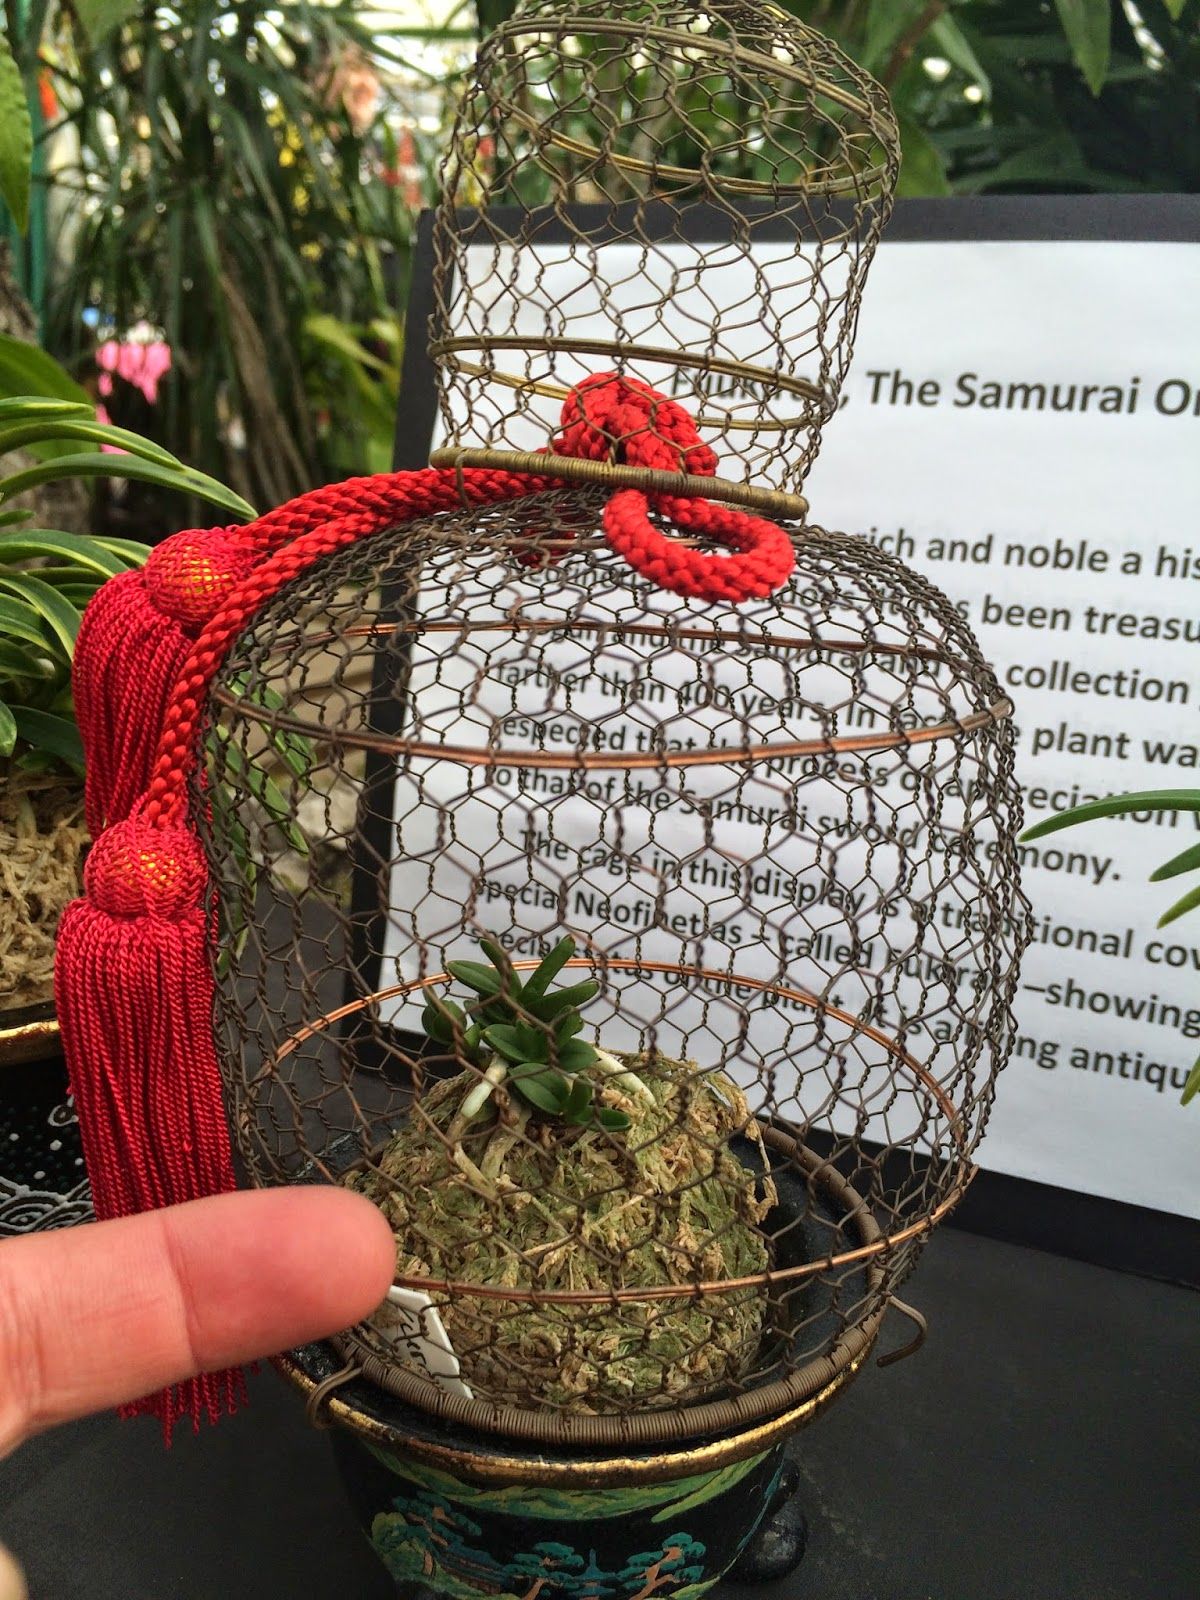 A photo of a caged fūkiran by Shirley at Salisbury Greenhouse for the Worlds of Orchids event. September 2014. http://shirley-agardenerslife.blogspot.com/2014/09/worlds-of-orchids.html